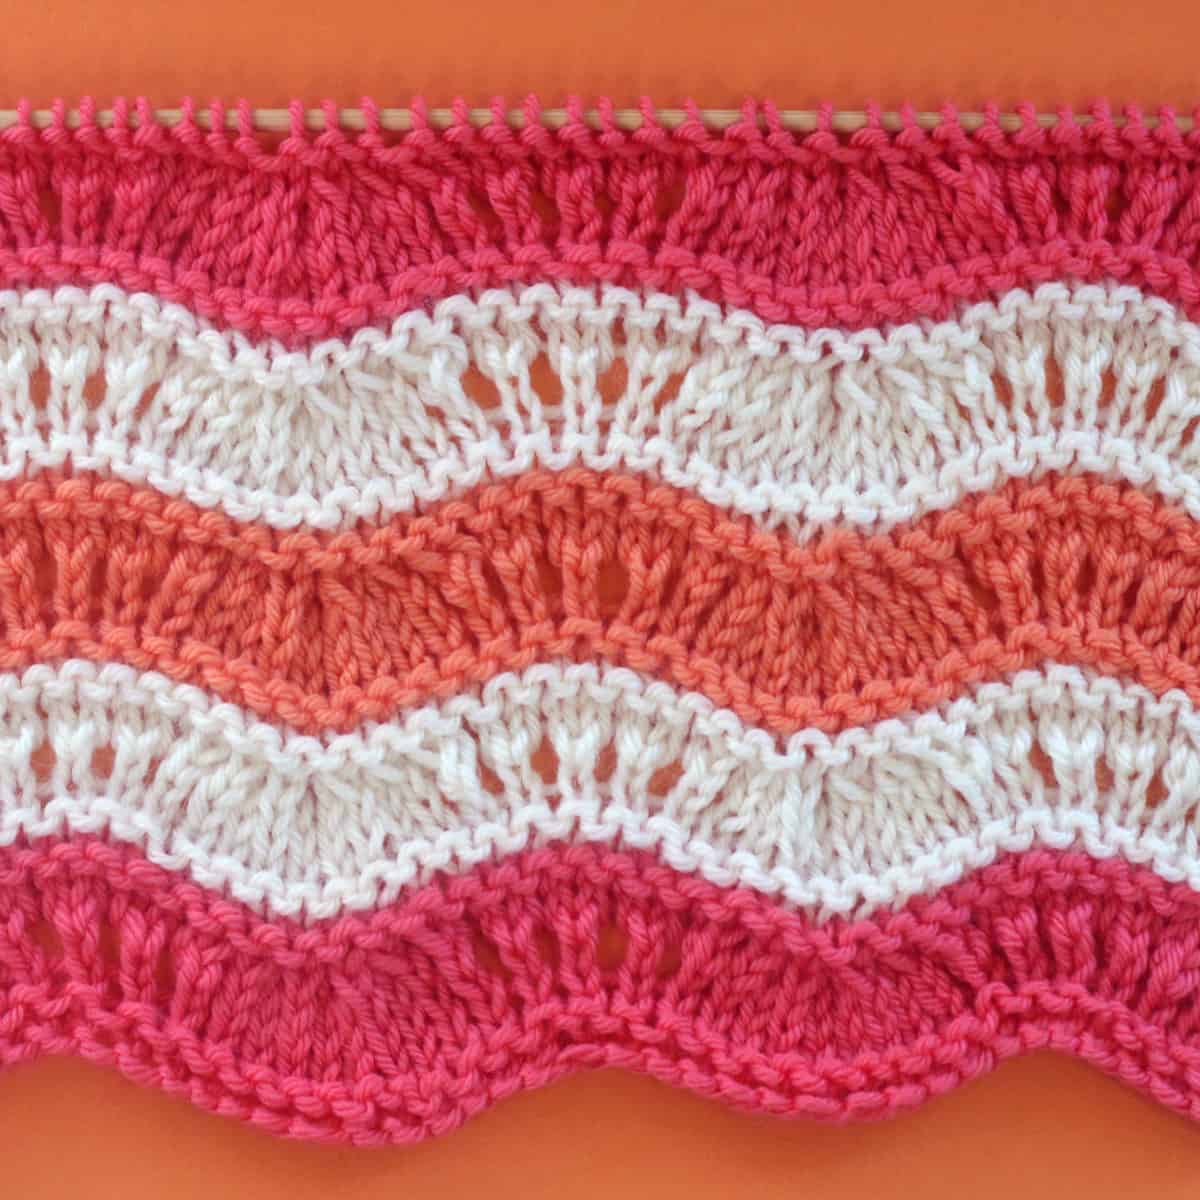 Ripple Ridge knit stitch texture in alternating yarn colors of pink, orange, and white on a wooden bamboo knitting needle.